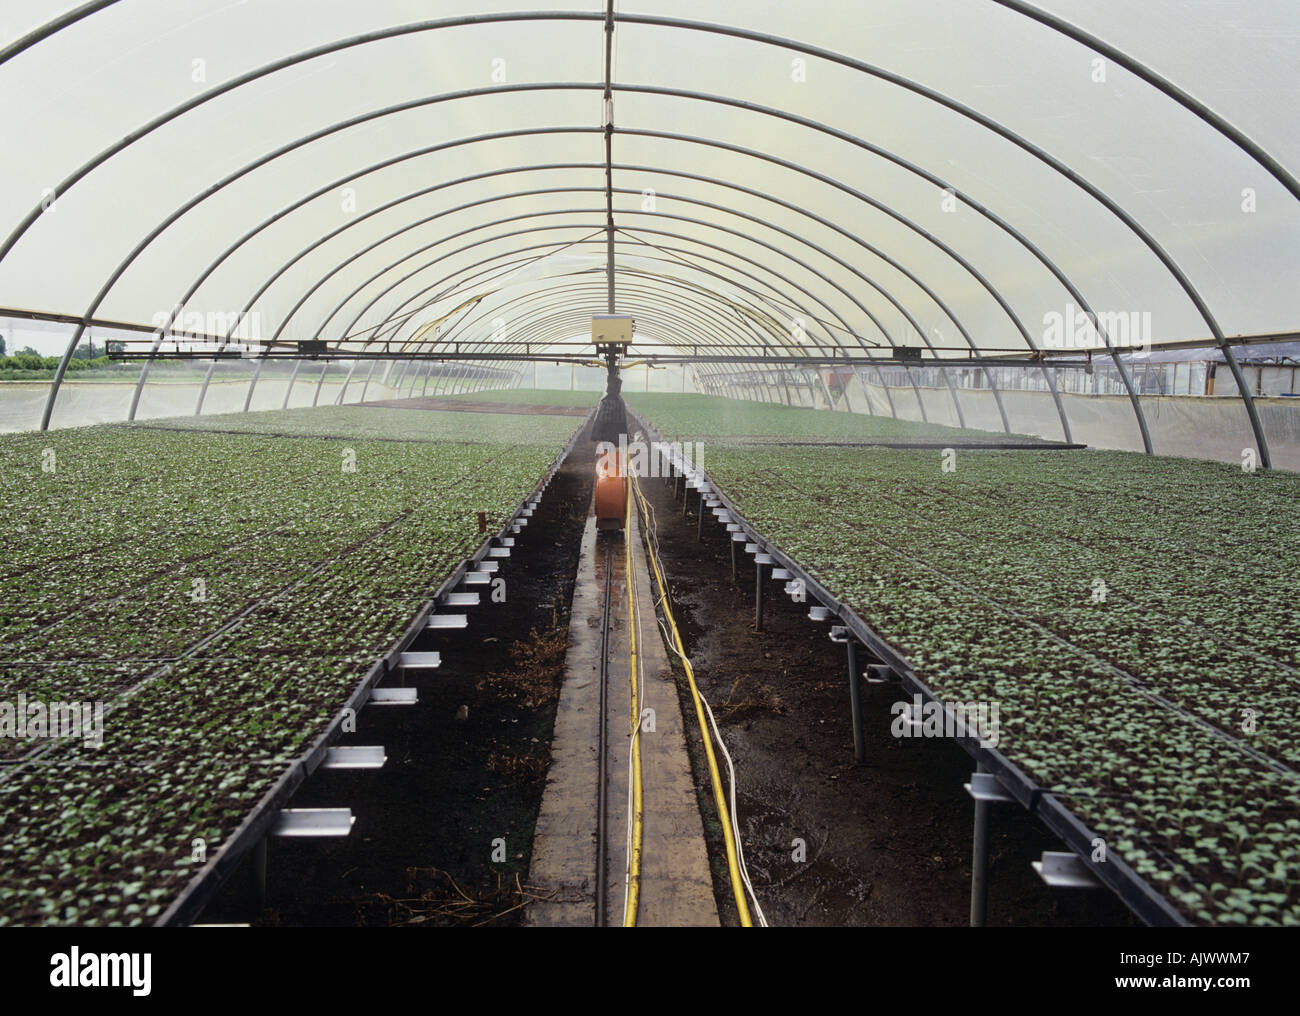 Seedling cabbage plants reared in a polythene house and automatically mist watered Stock Photo